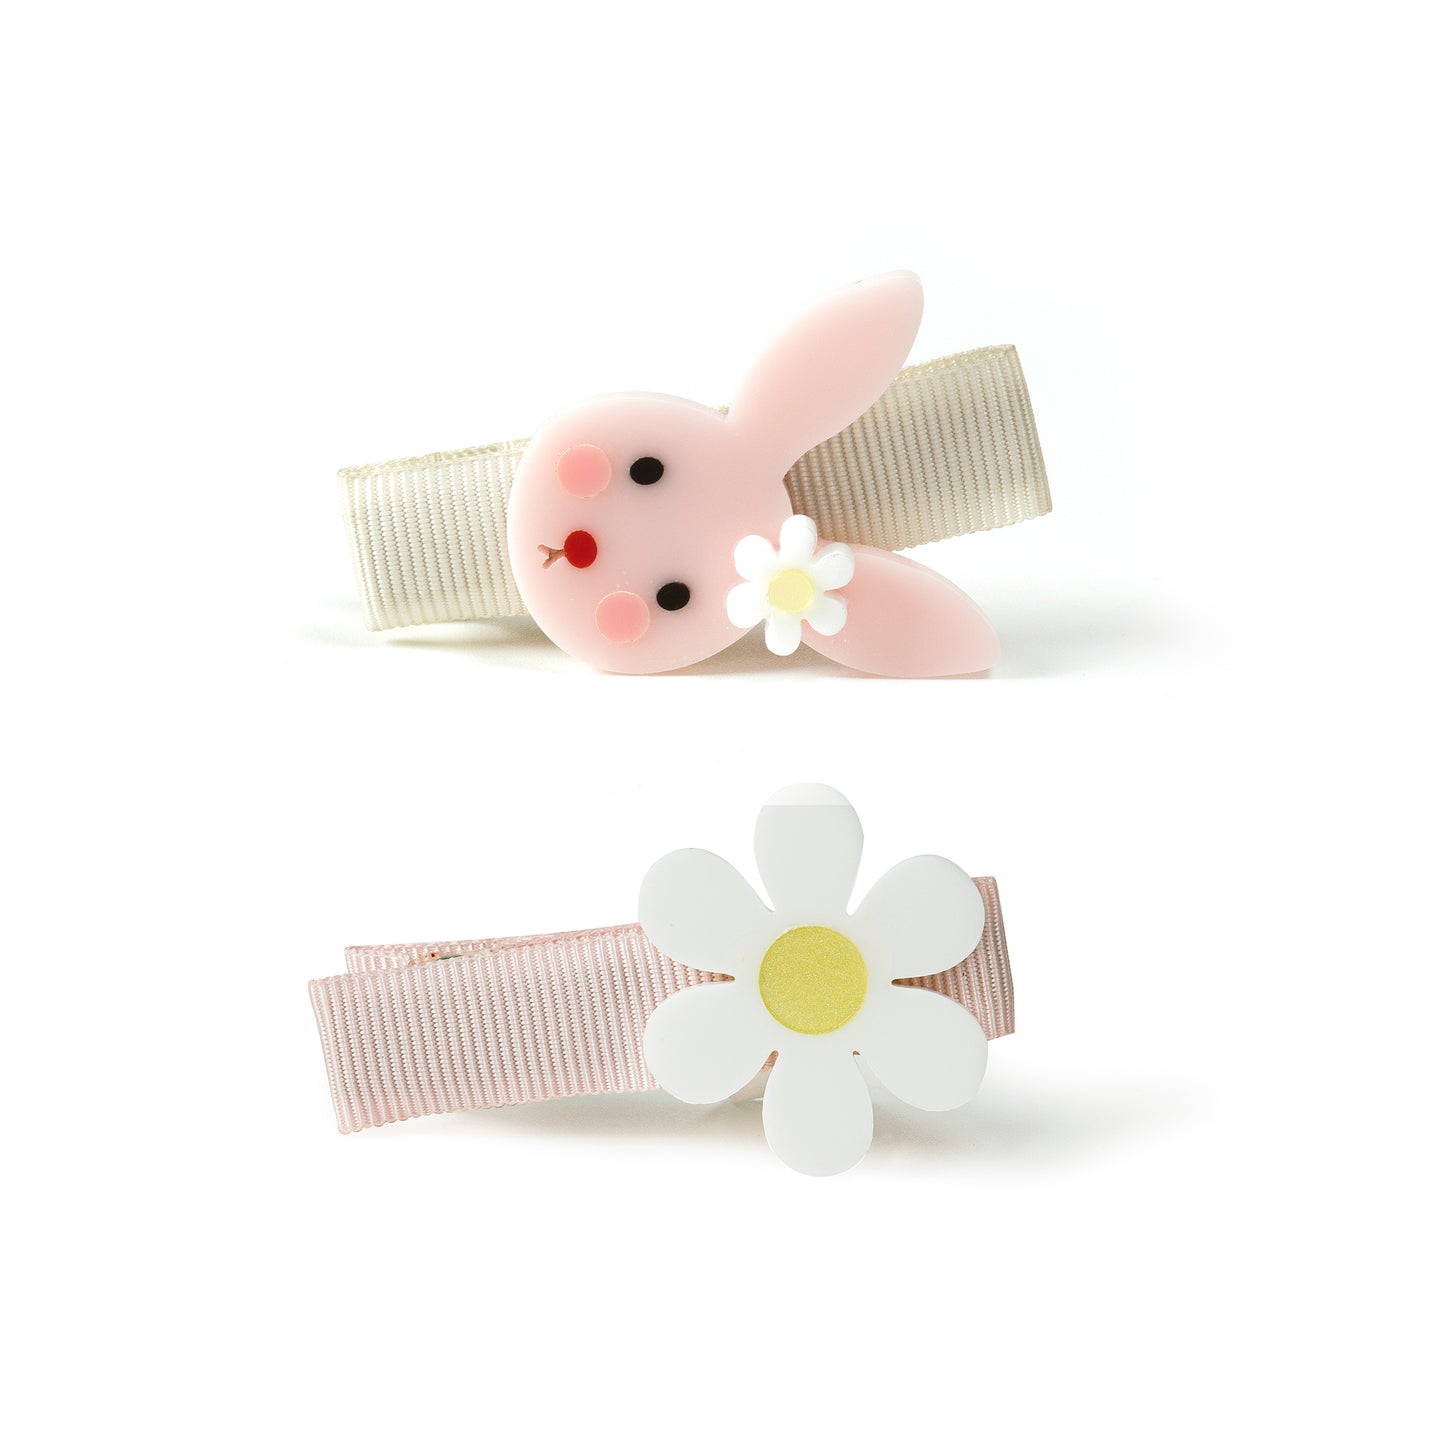 Pair of hair clips. One has a cute light pink bunny face with a daisy on one of his ear. The second one is adorned with a daisy. 